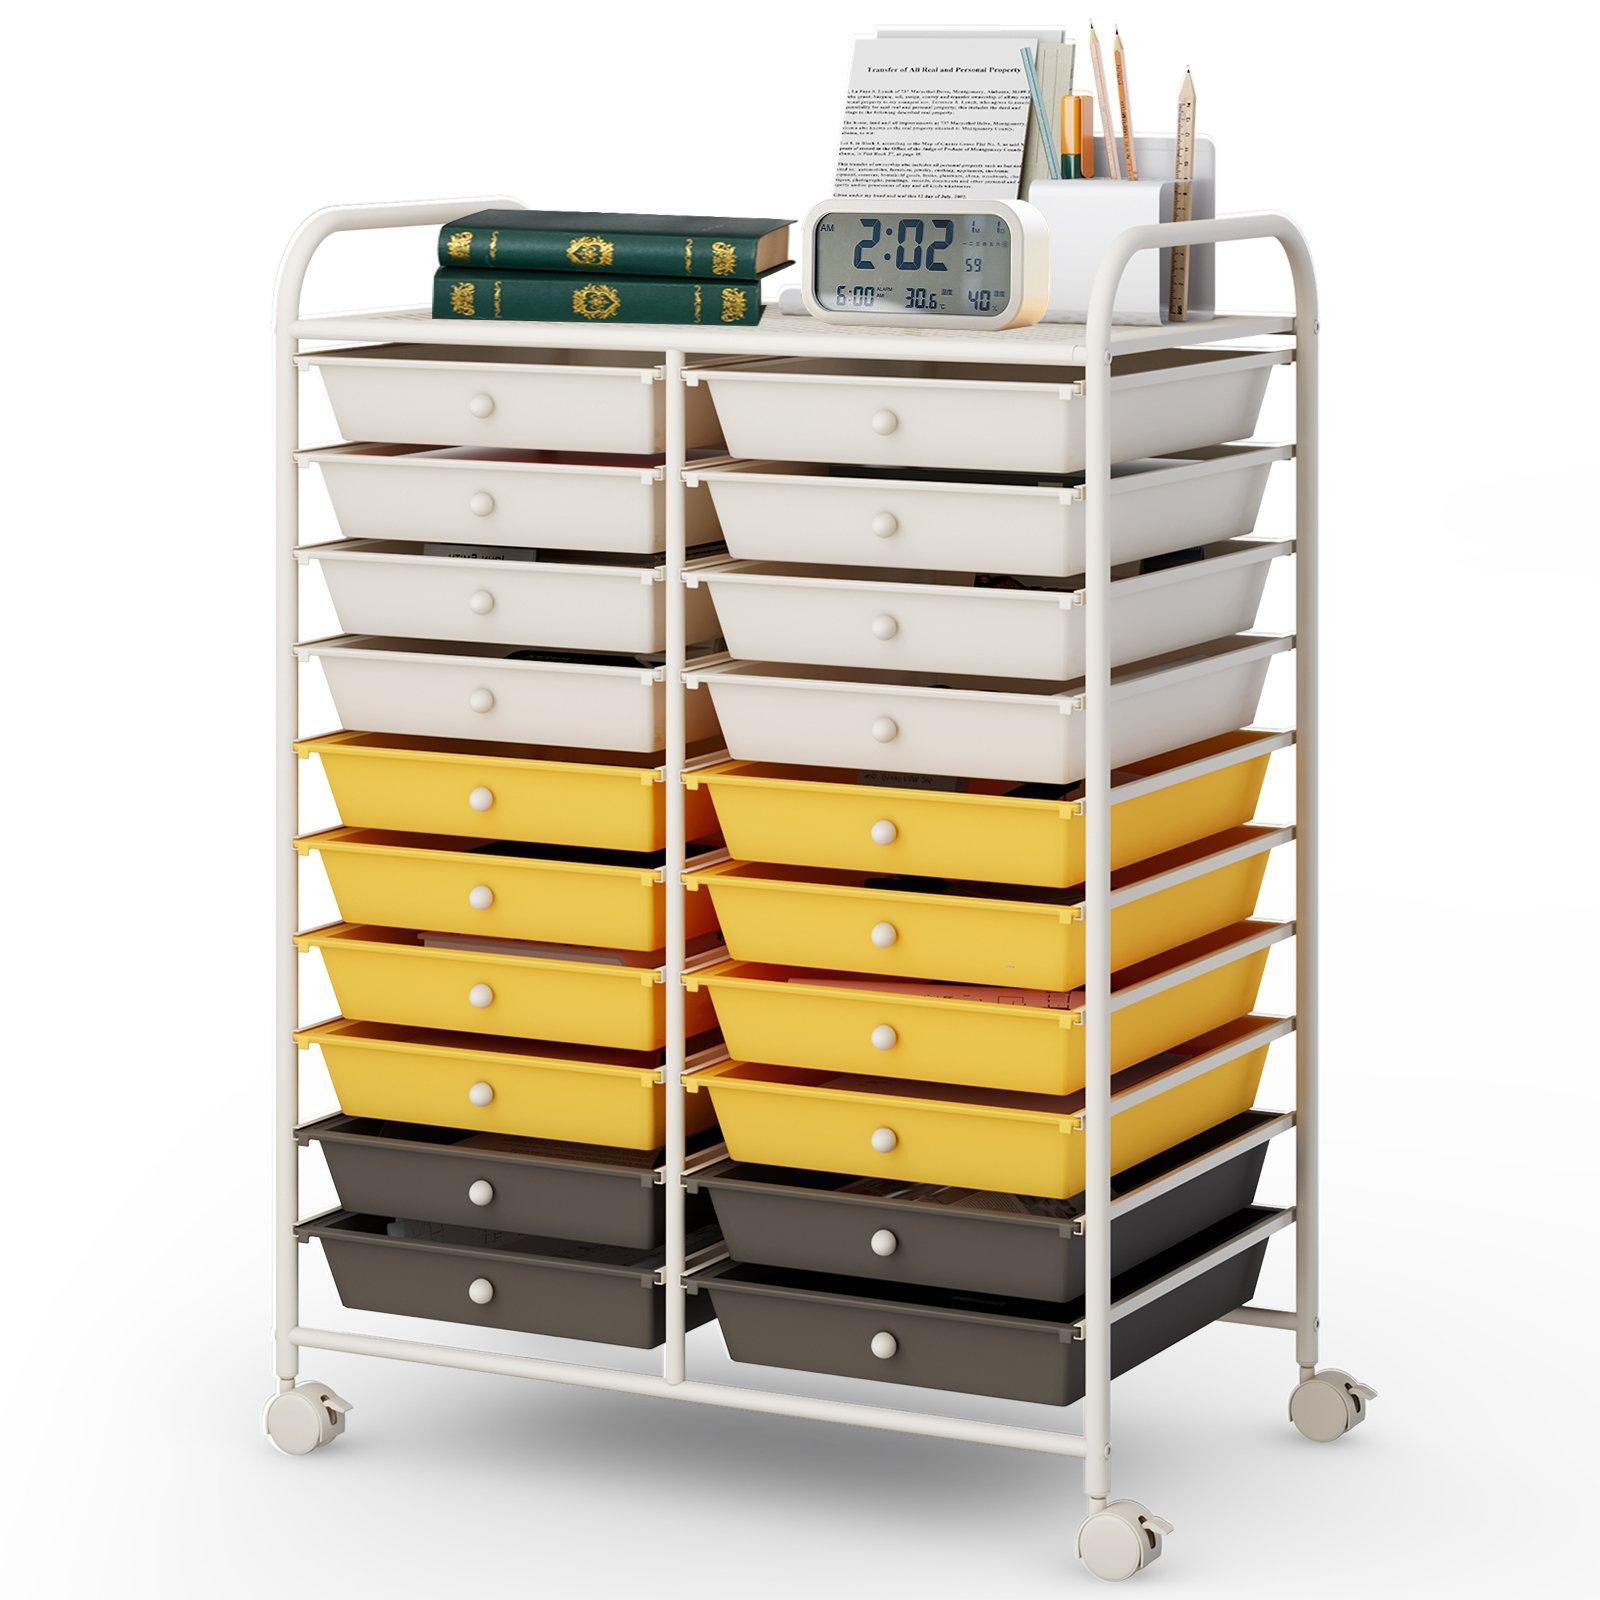 20 Drawers Storage Rolling Cart Home Office Mobile Utility Trolley Organizer - image 1